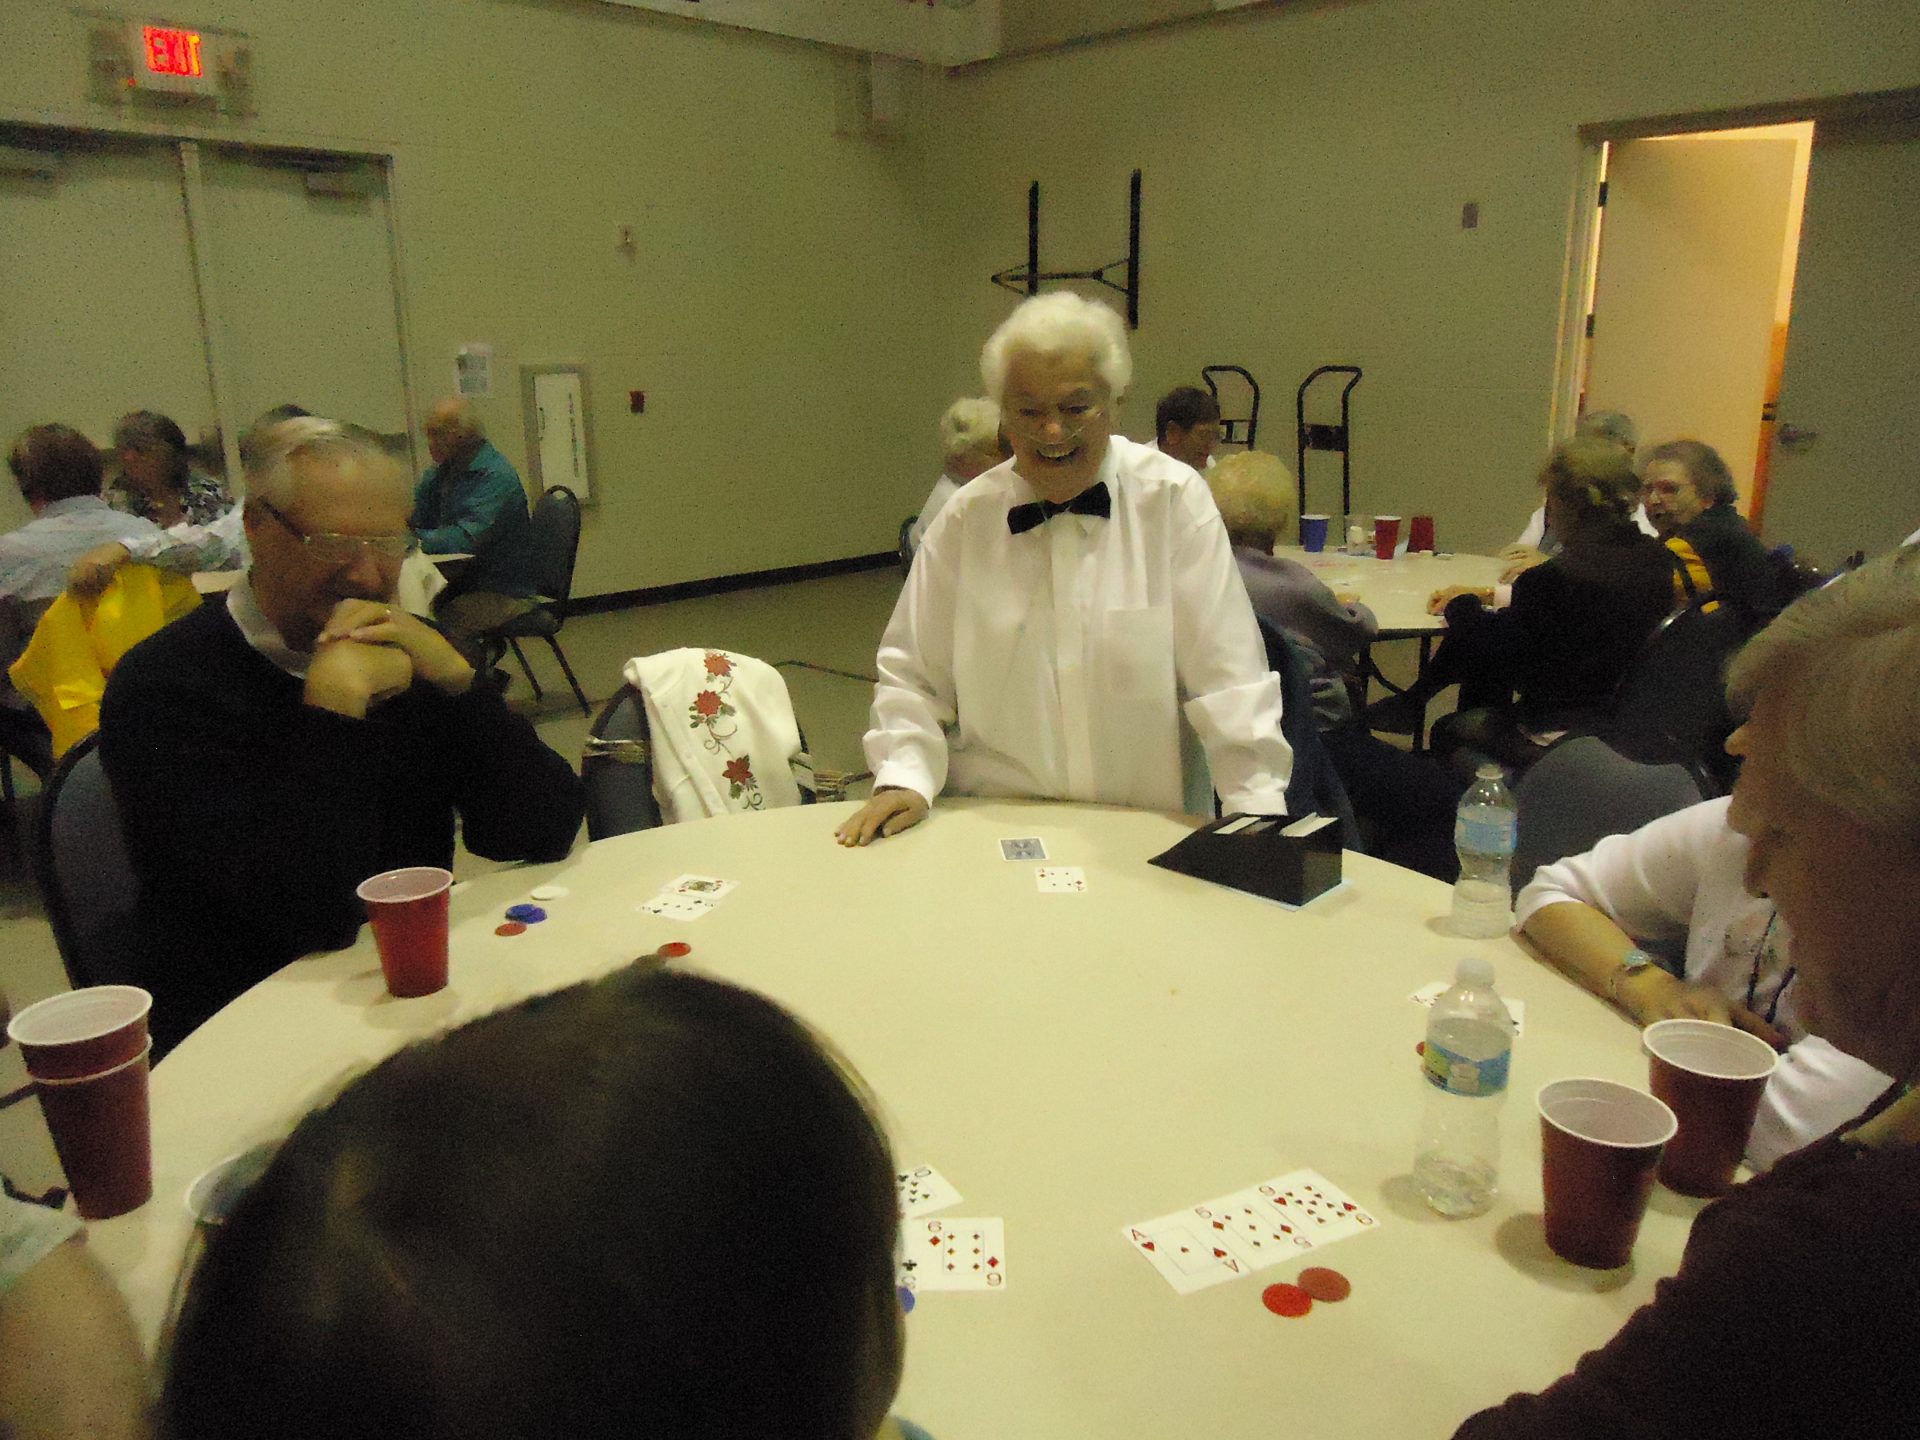 Beloved Ann as one of our poker dealers at the St. Vincent de Paul Las Vegas Night 2/2016